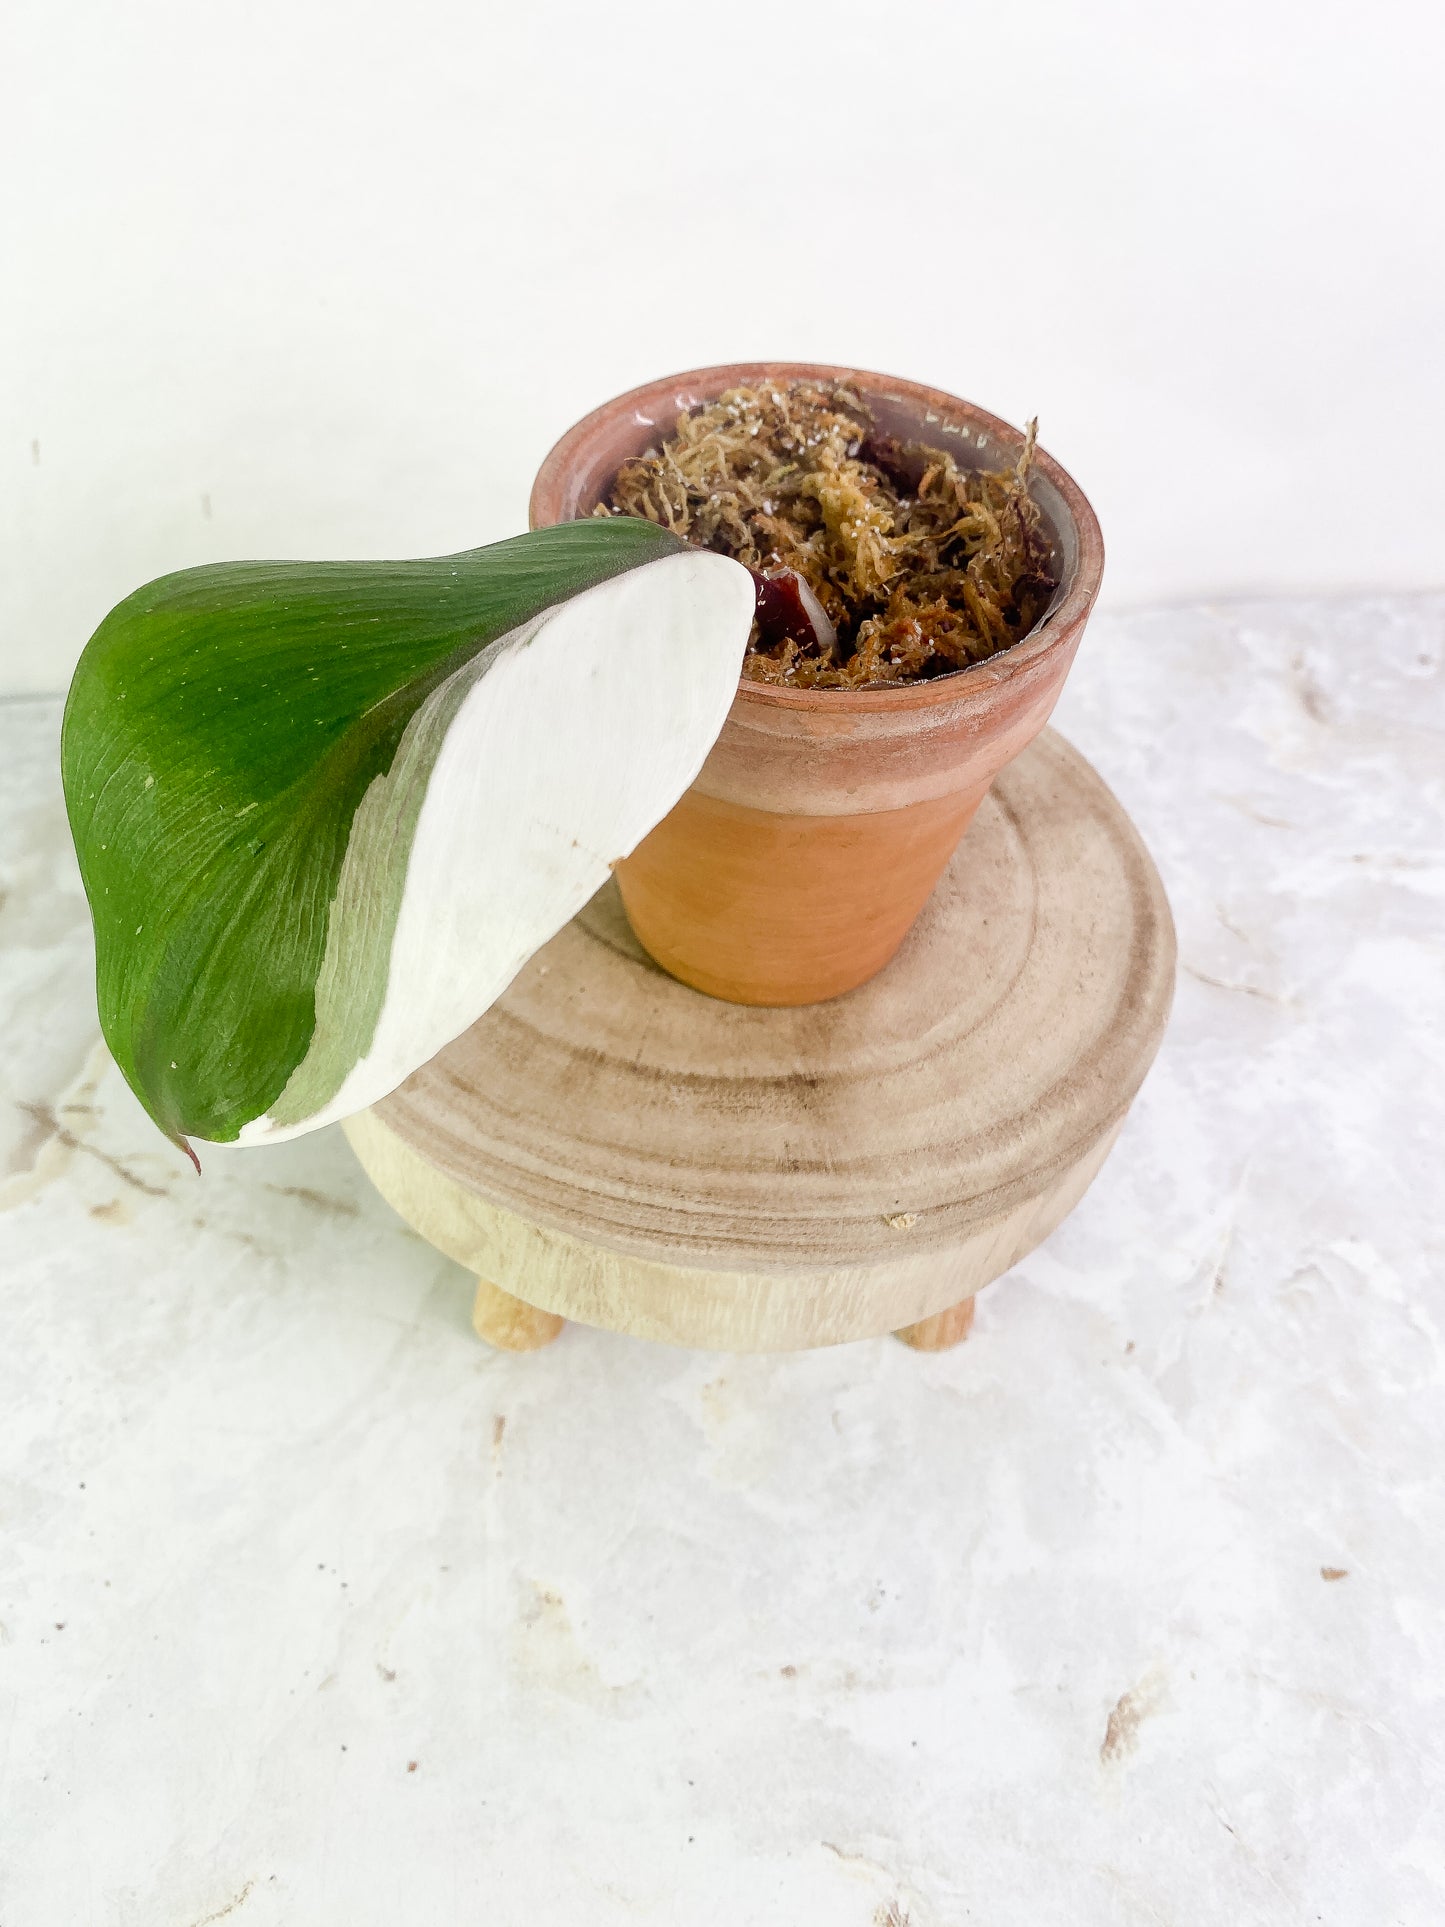 Philodendron white knight tricolor 1 leaf halfmoon Rooting